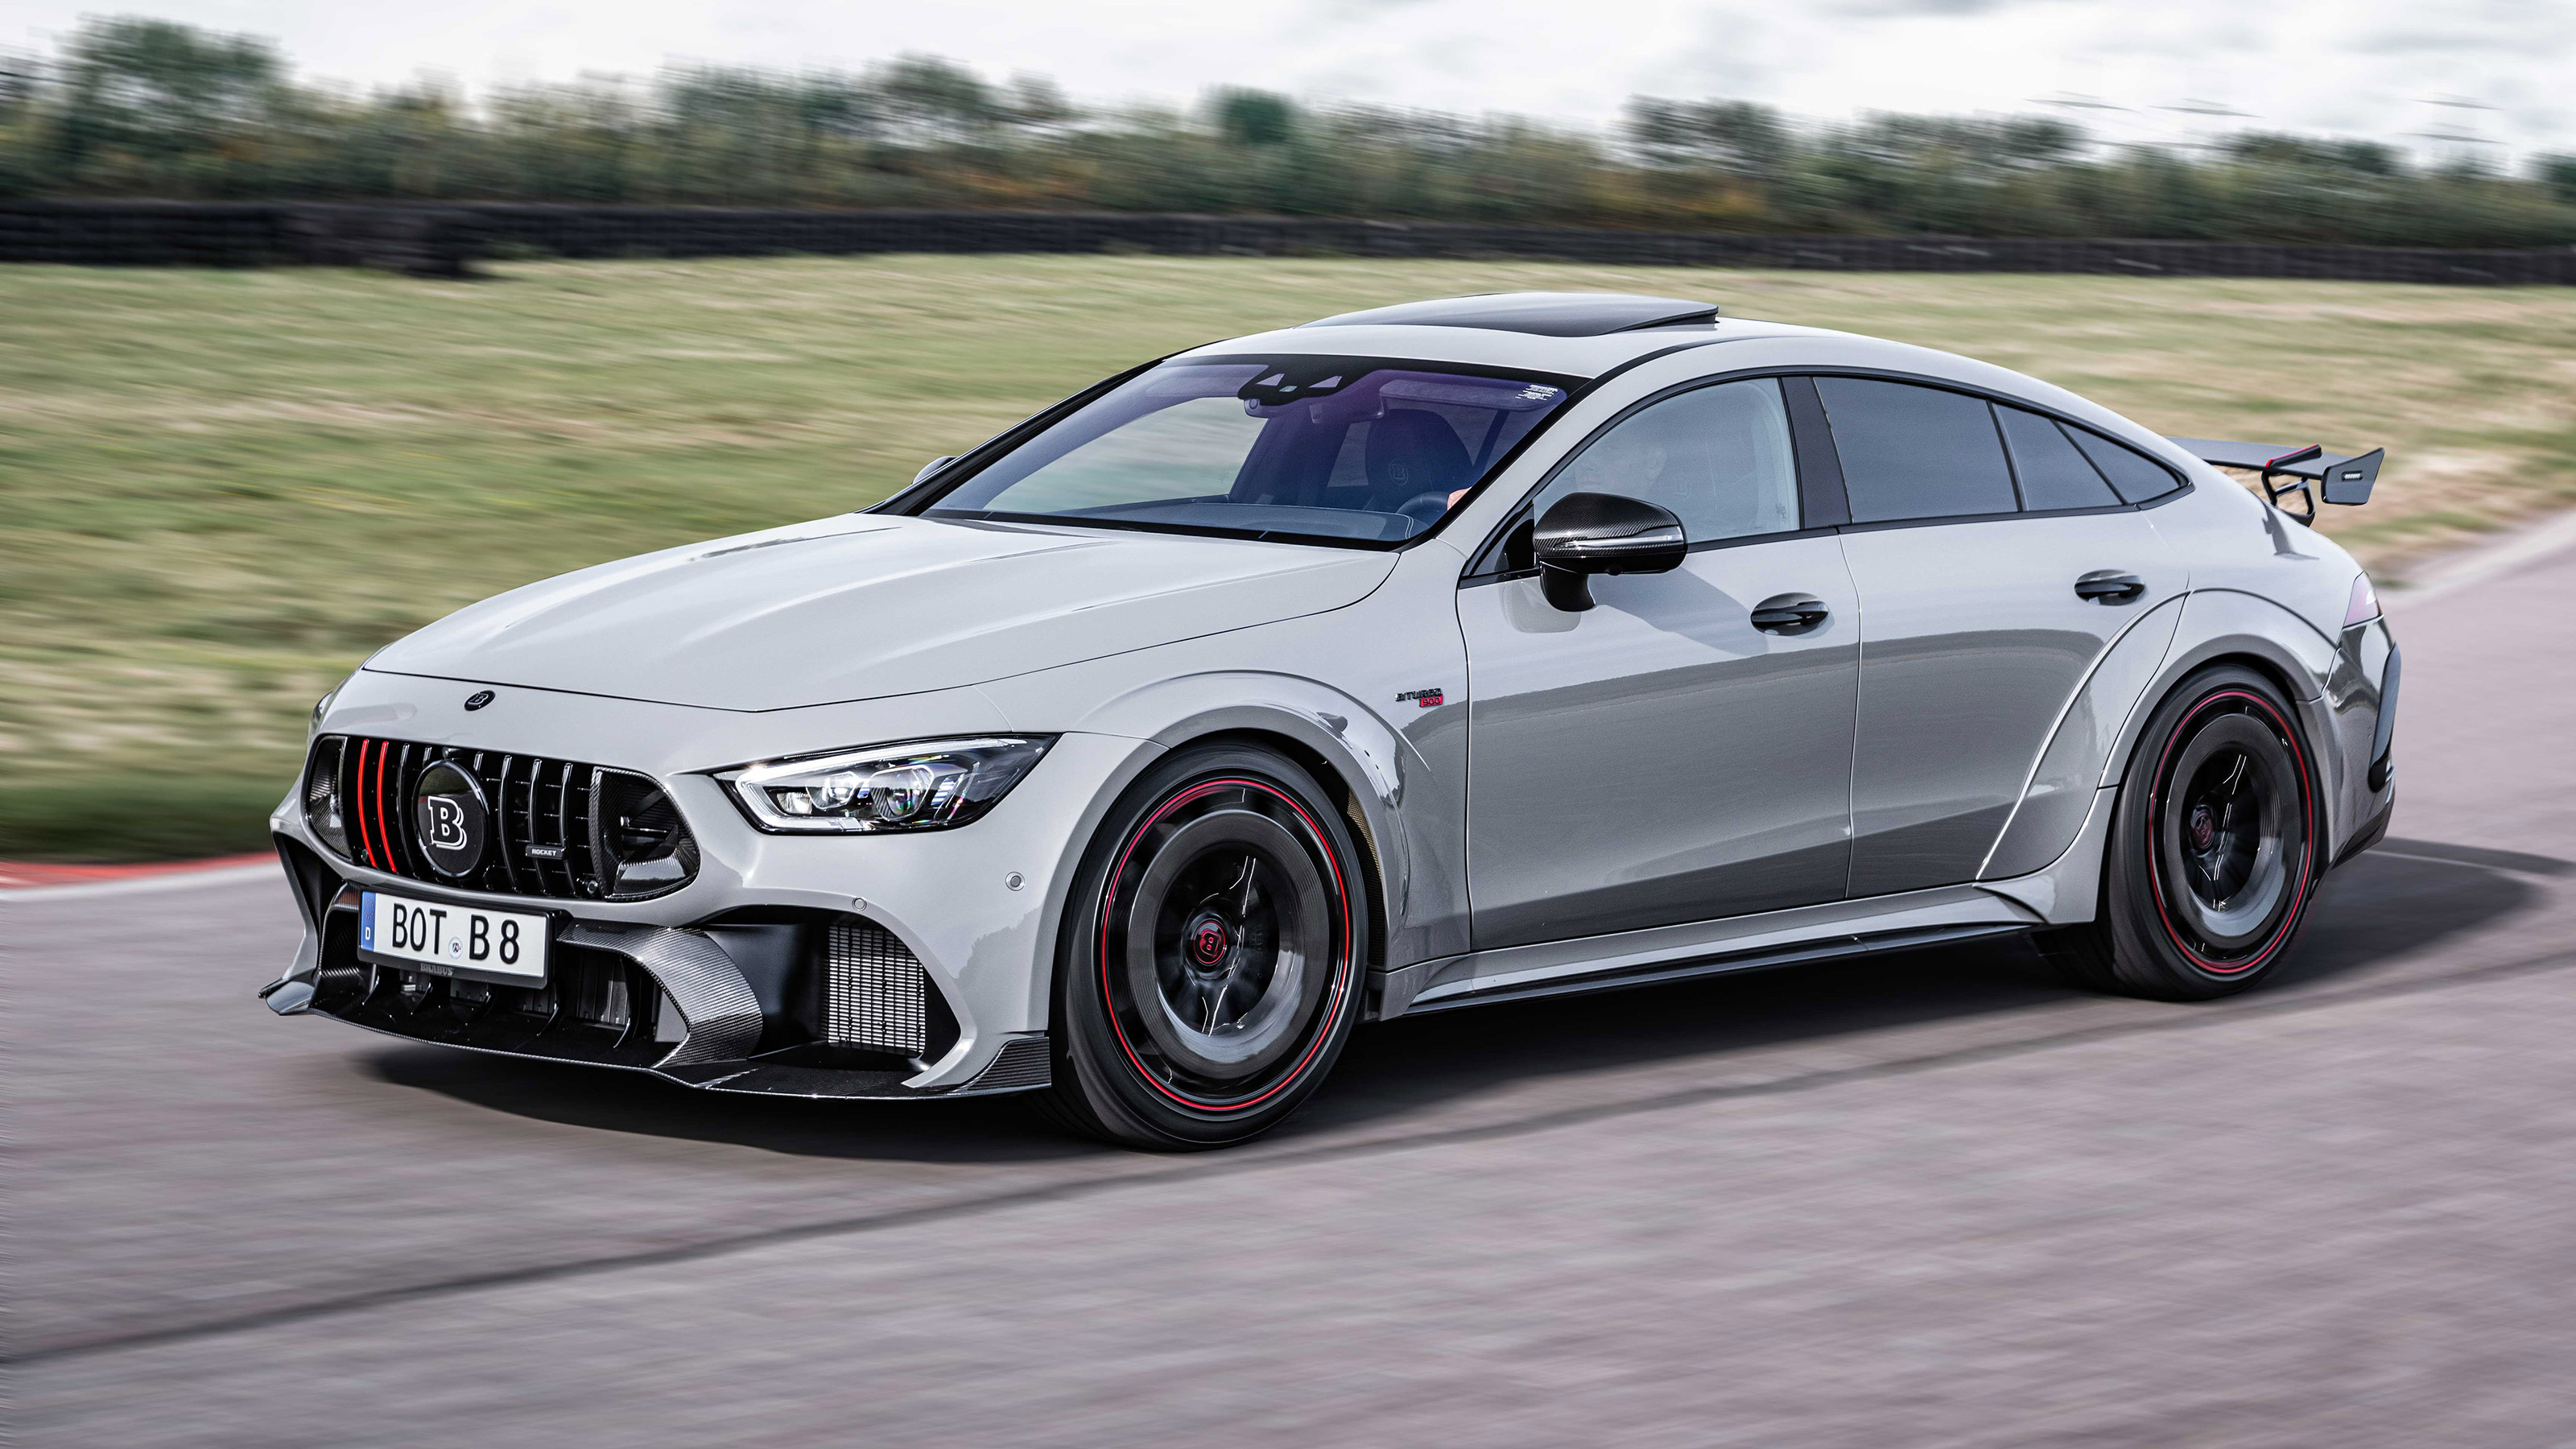 5mph Brabus Rocket 900 Revealed A Mercedes Amg Gt 63 S Turned To 8bhp Evo